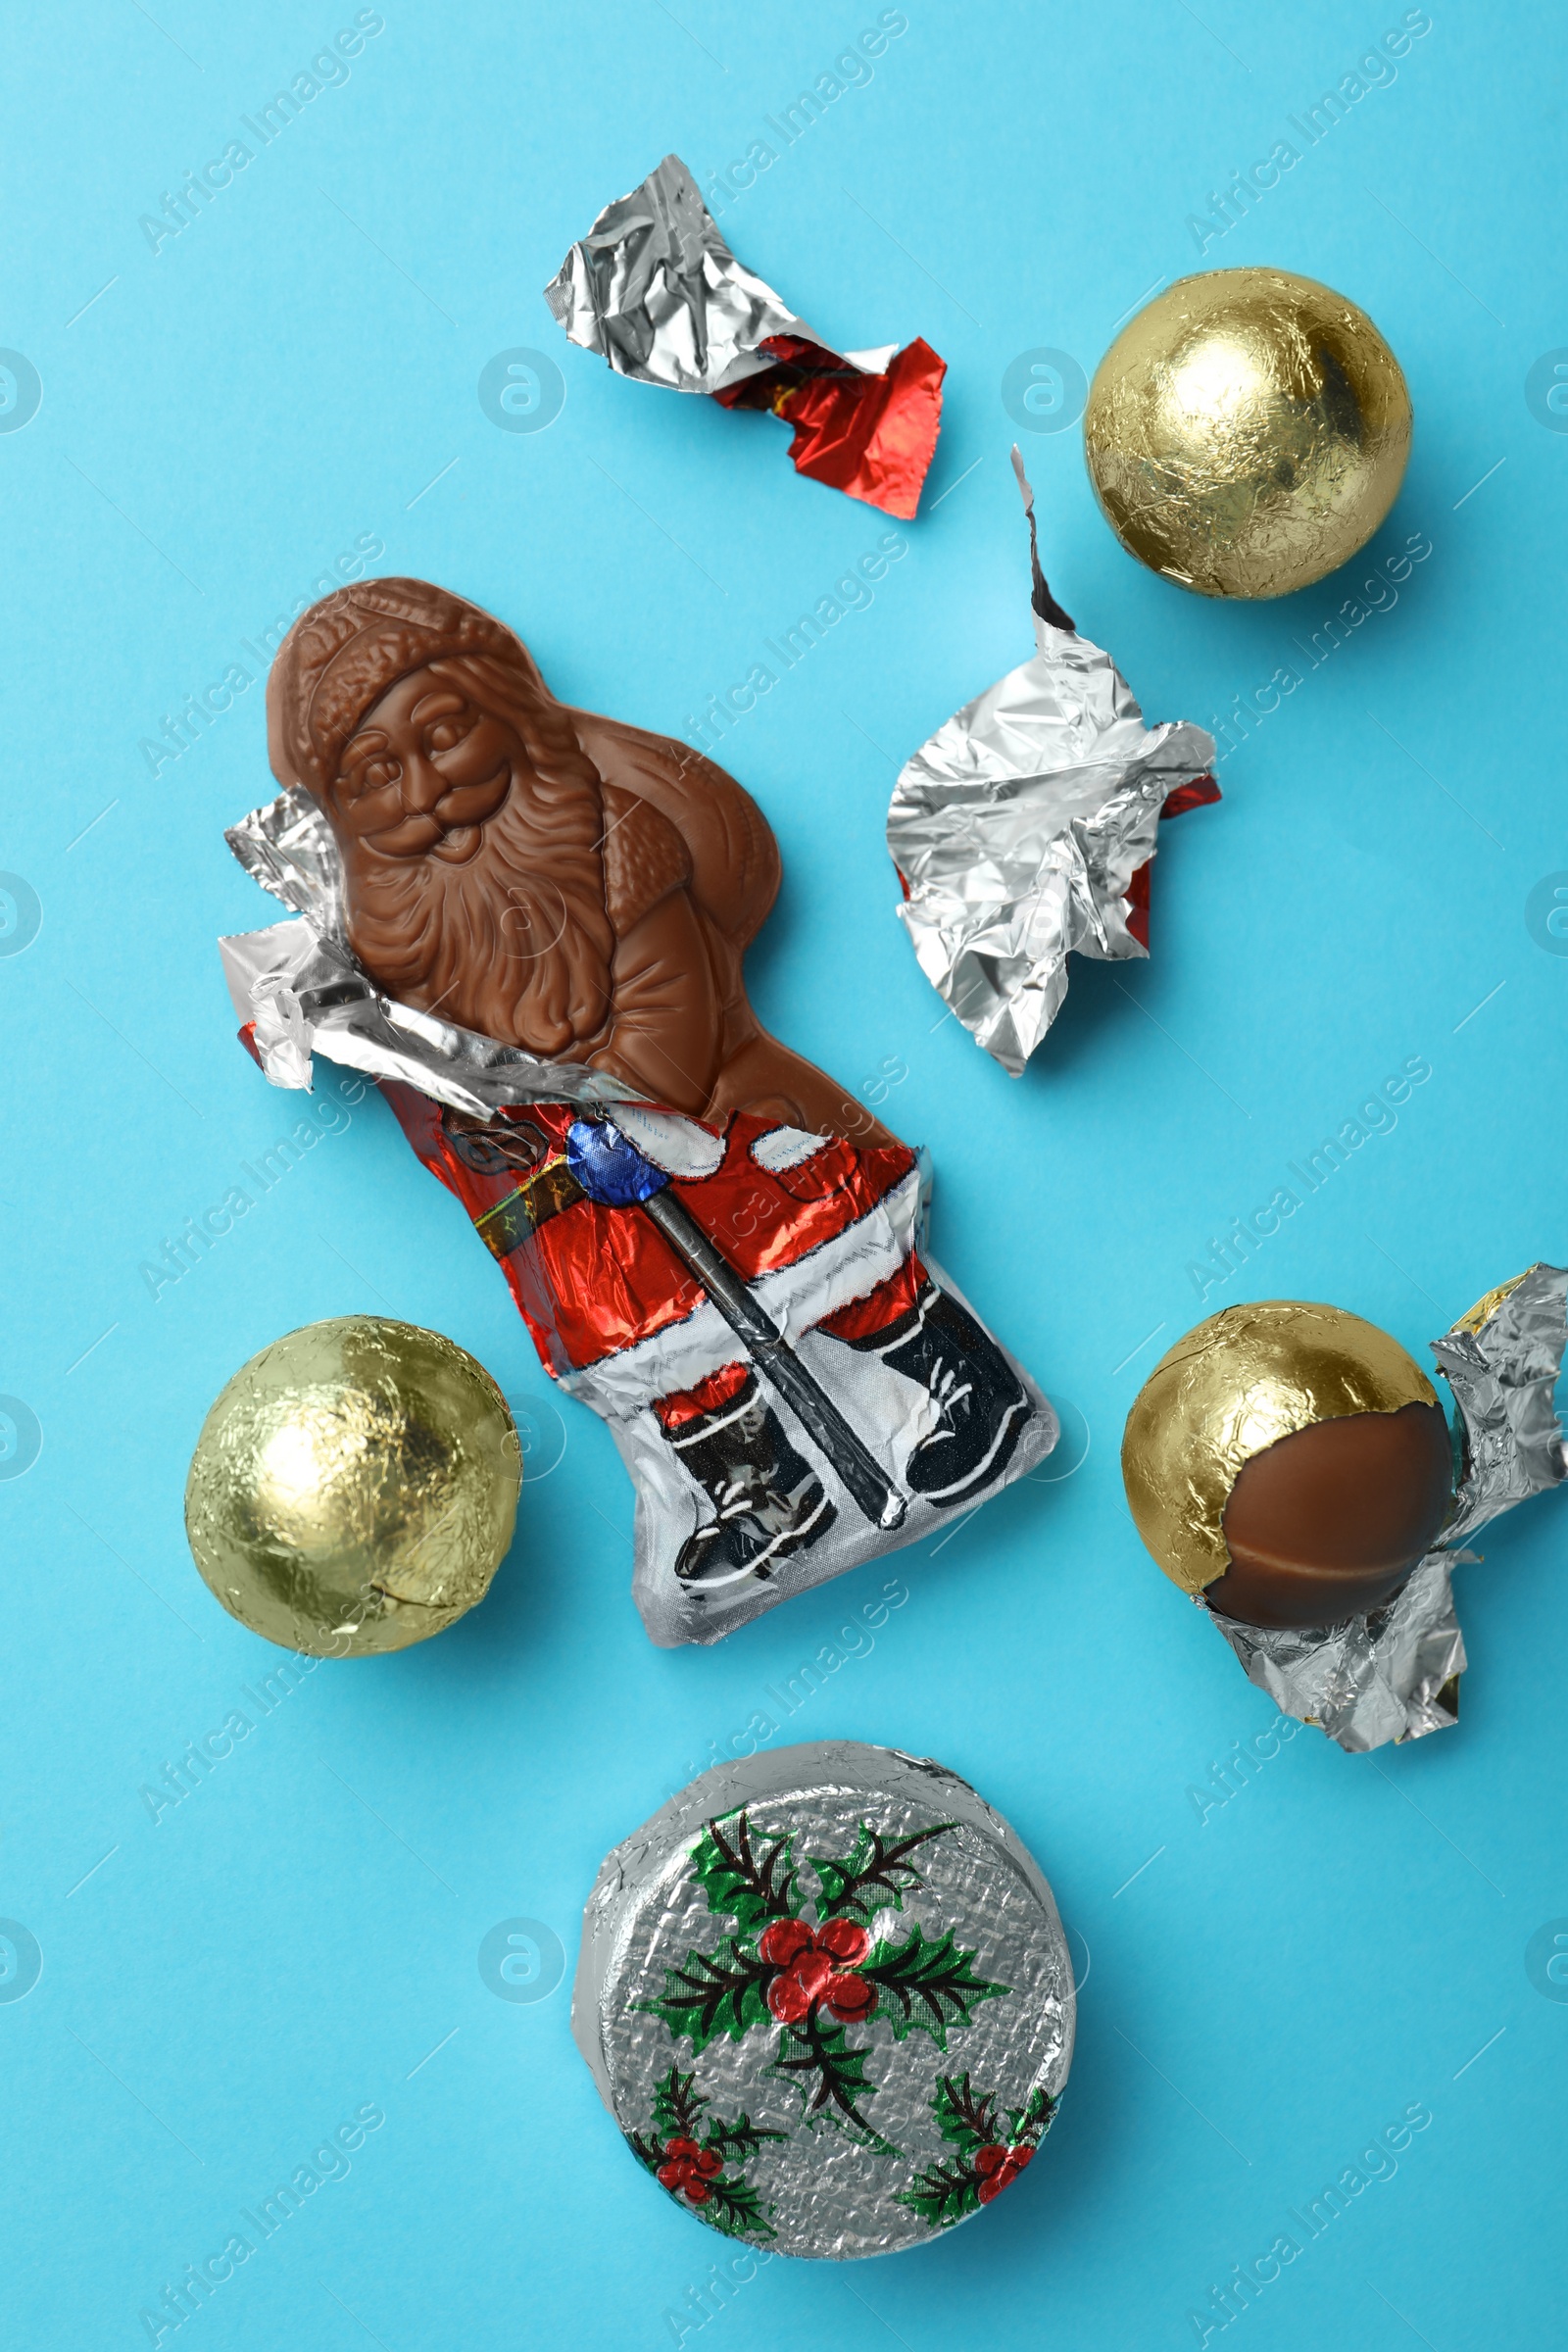 Photo of Chocolate Santa Claus and sweets on light blue background, flat lay